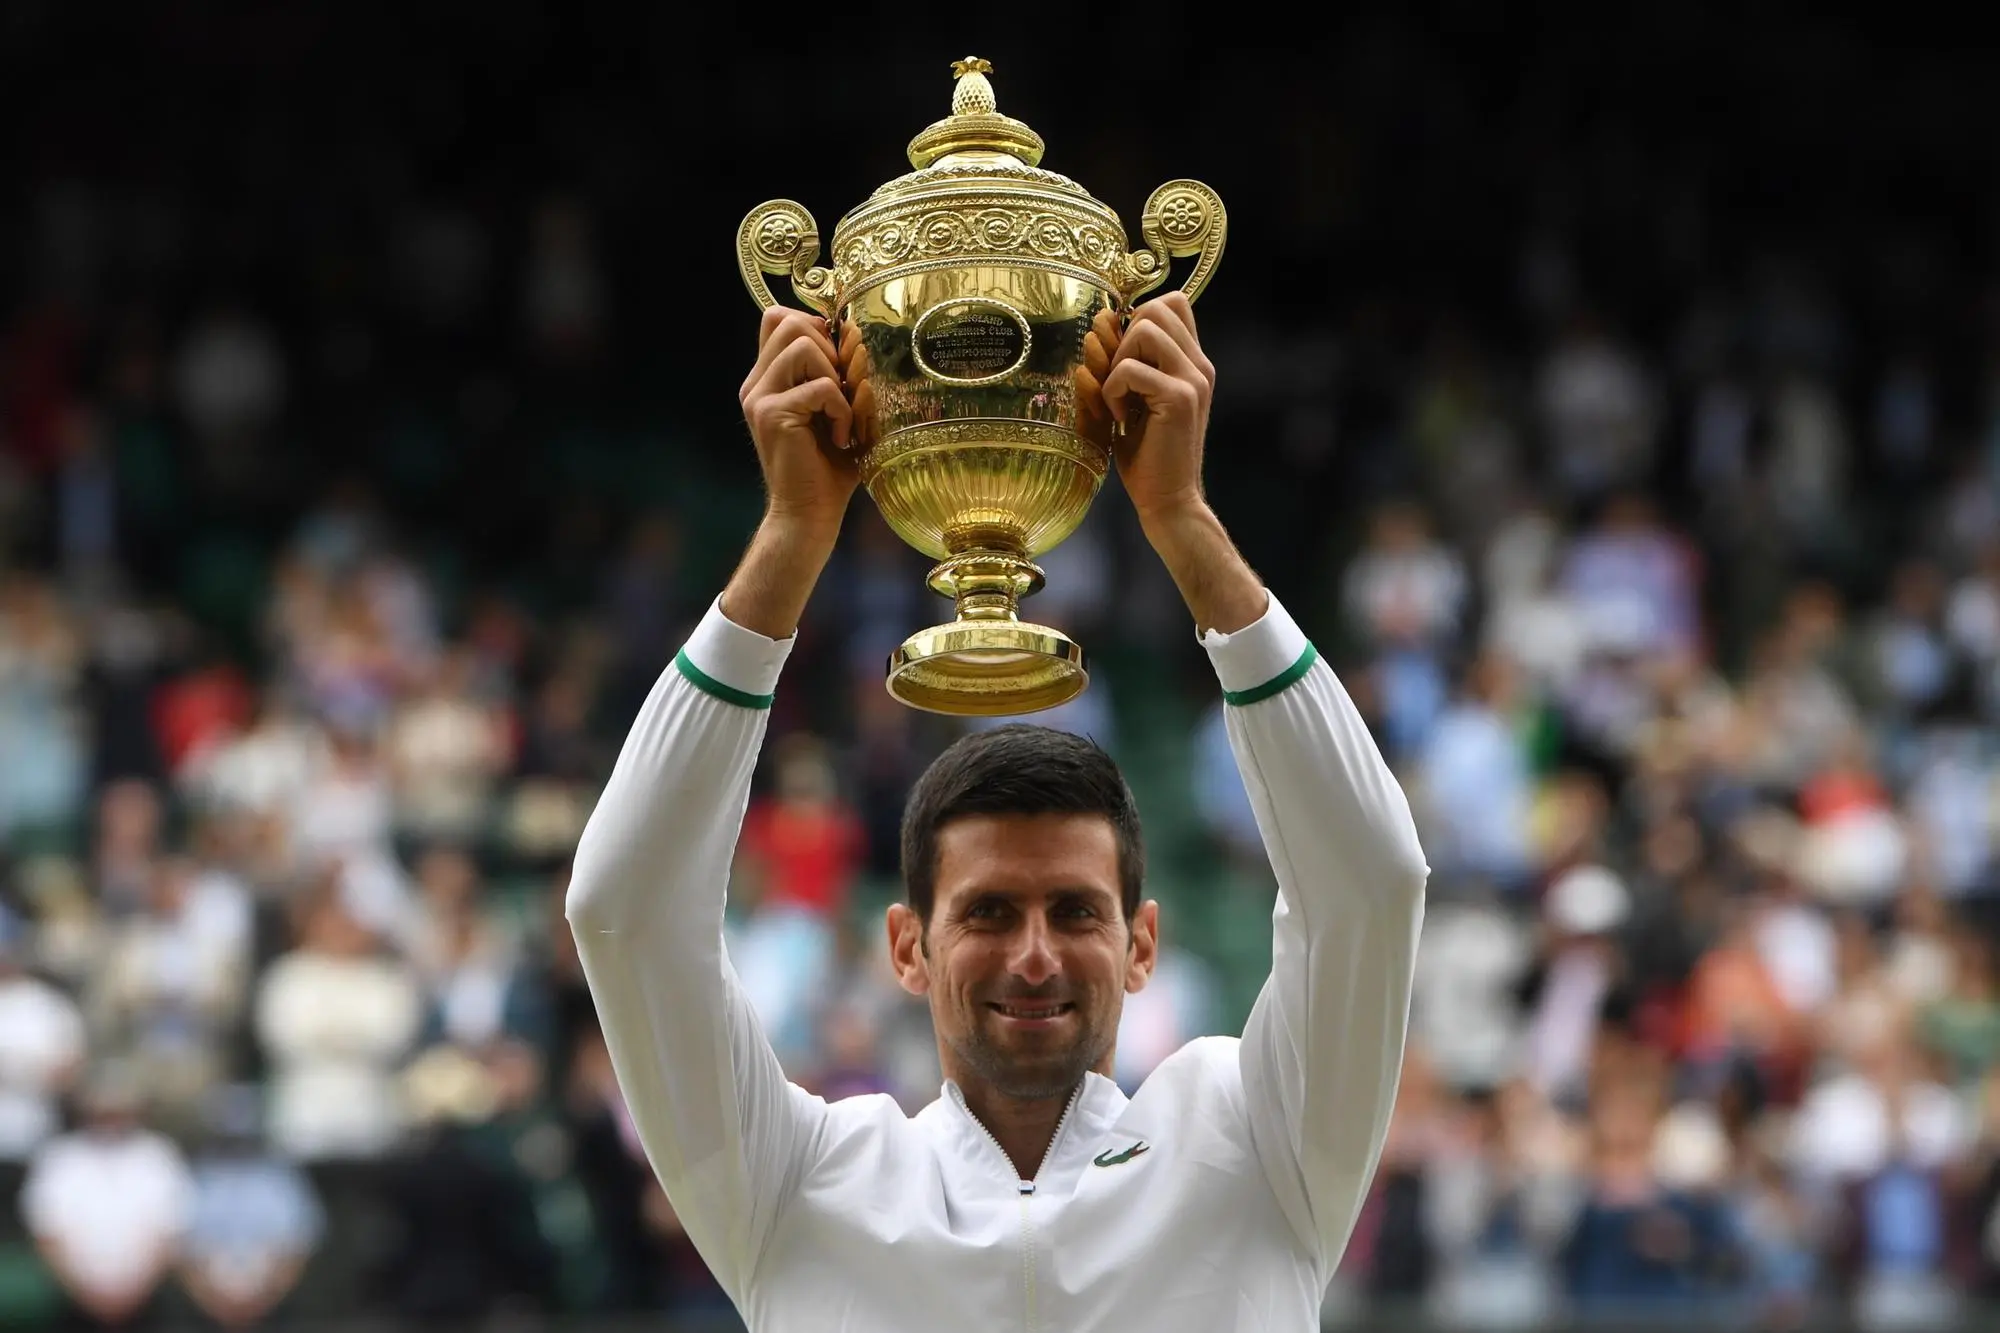 epa09337882 Novak Djokovic of Serbia poses for a photo with the trophy after winning the men's final against Matteo Berrettini of Italy at the Wimbledon Championships, Wimbledon, Britain 11 July 2021. EPA/NEIL HALL EDITORIAL USE ONLY